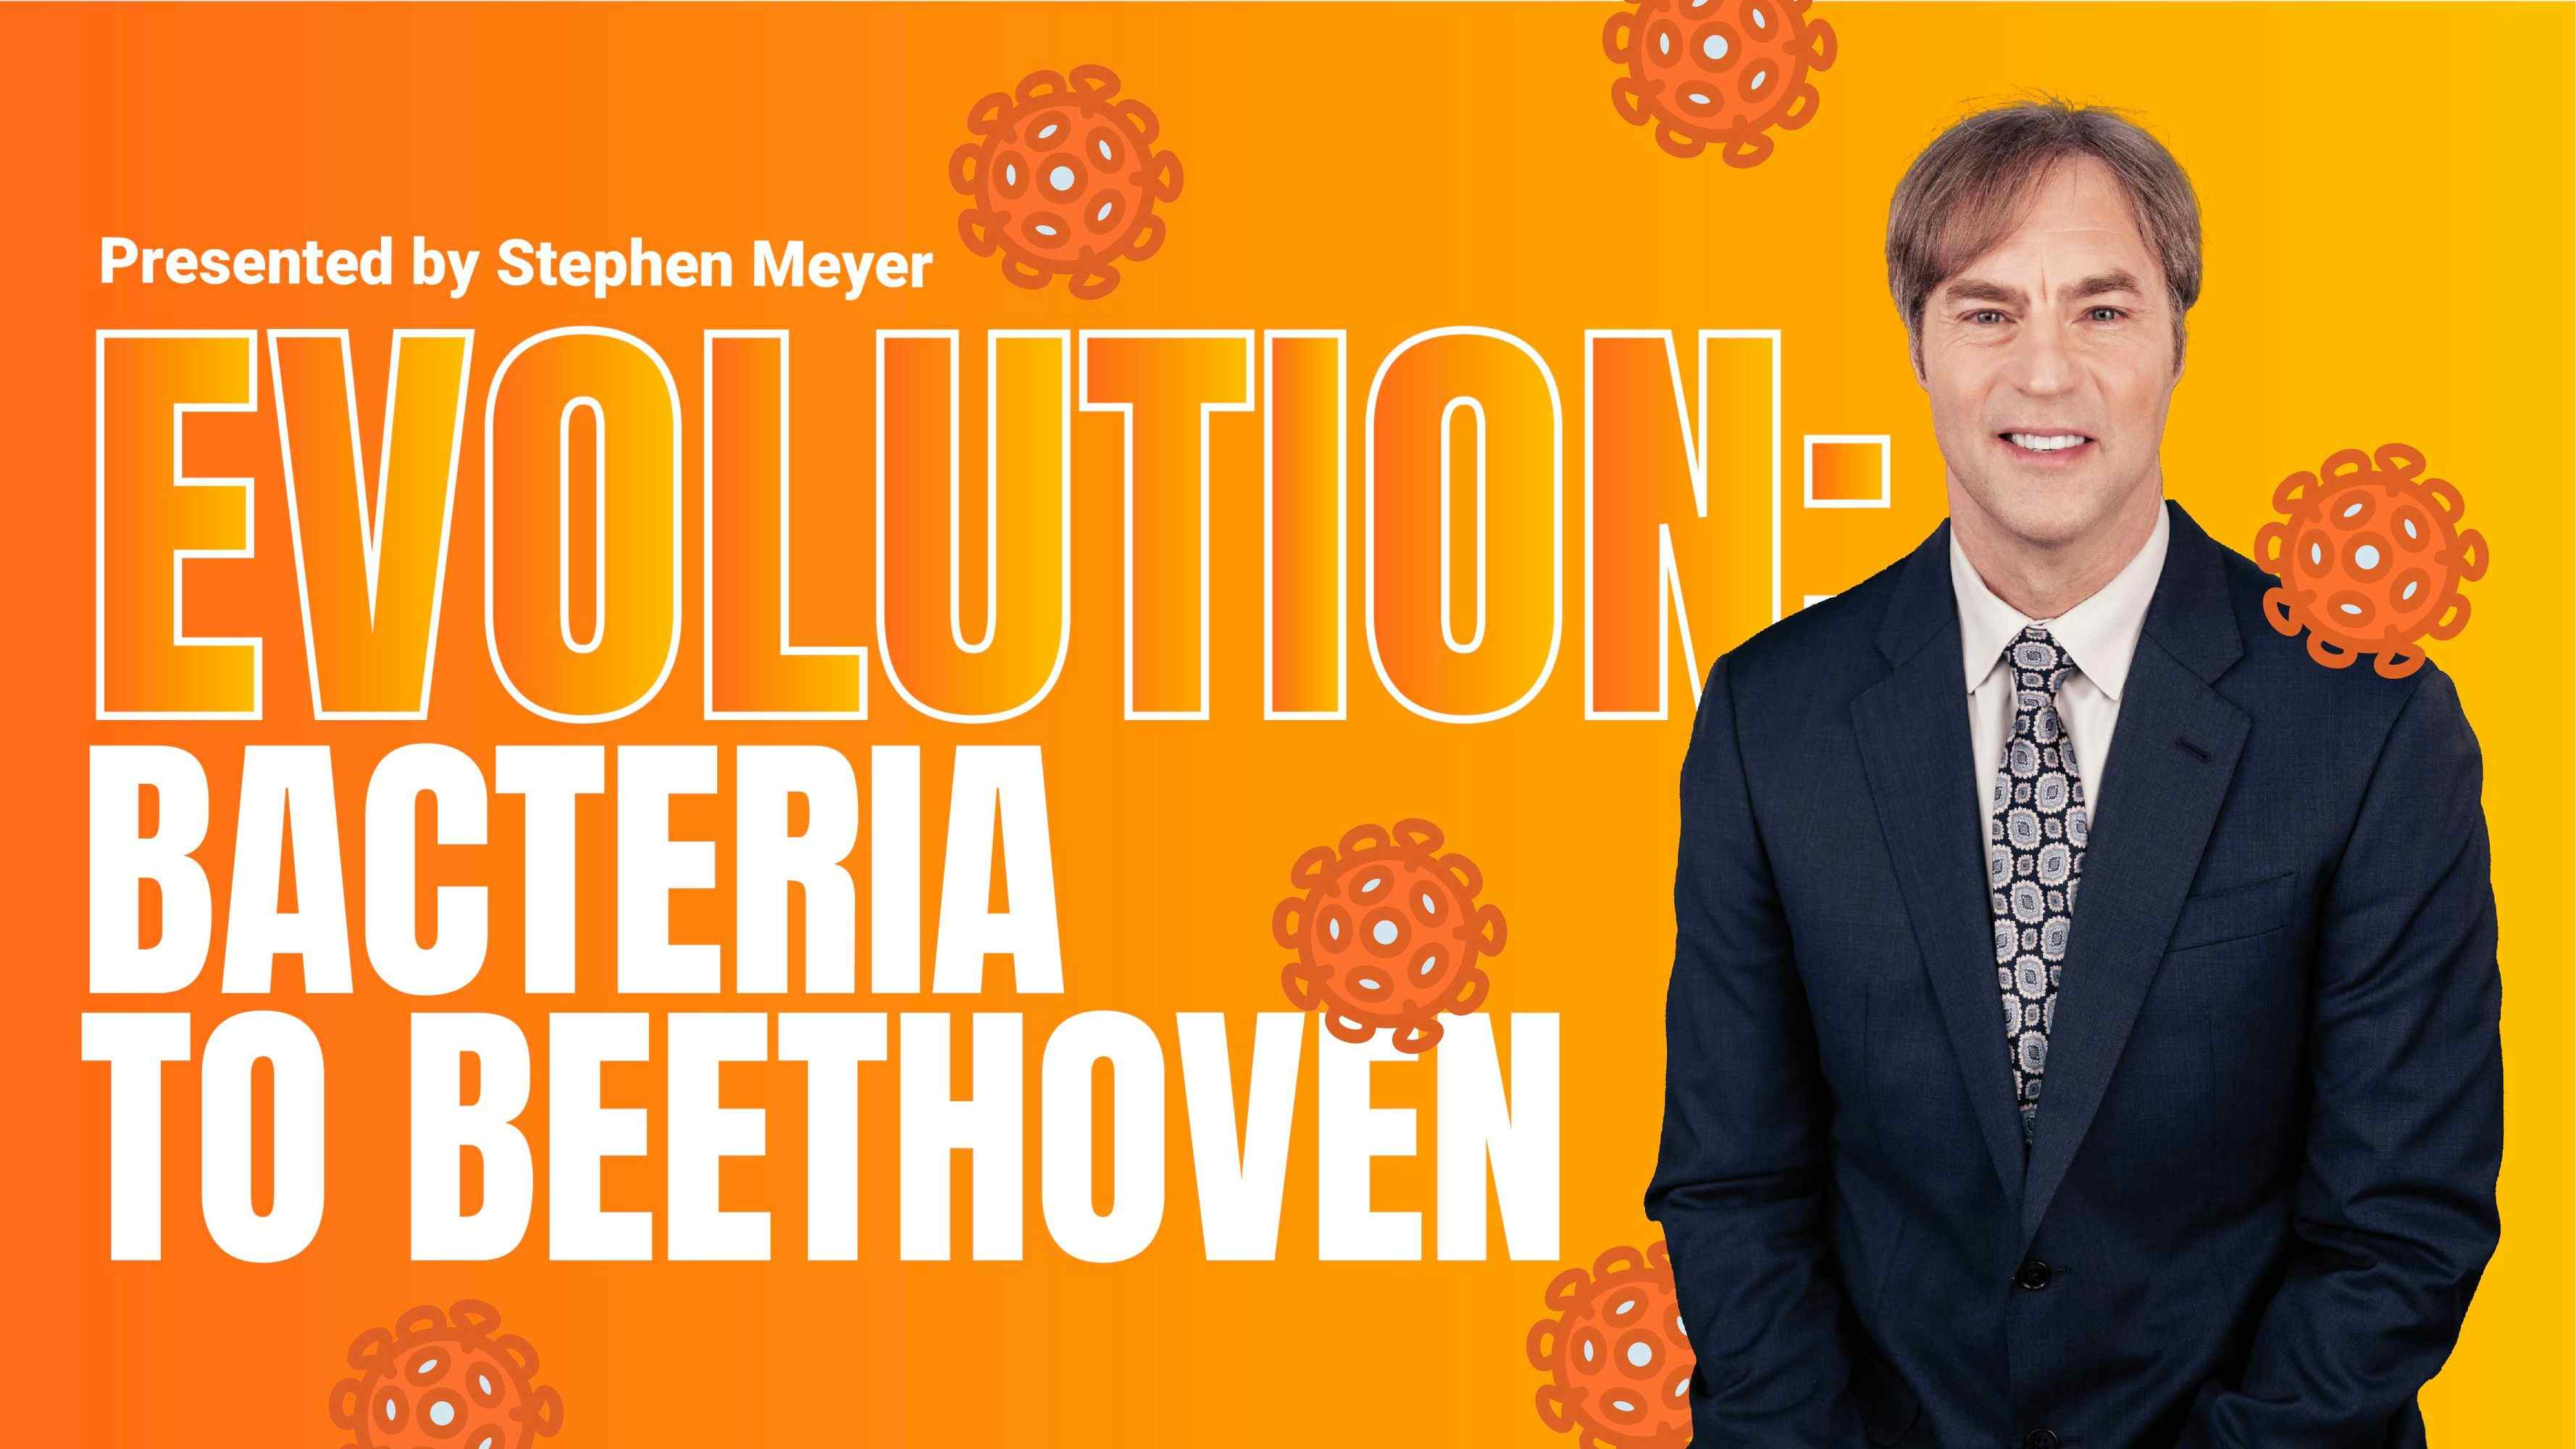 Evolution: Bacteria to Beethoven